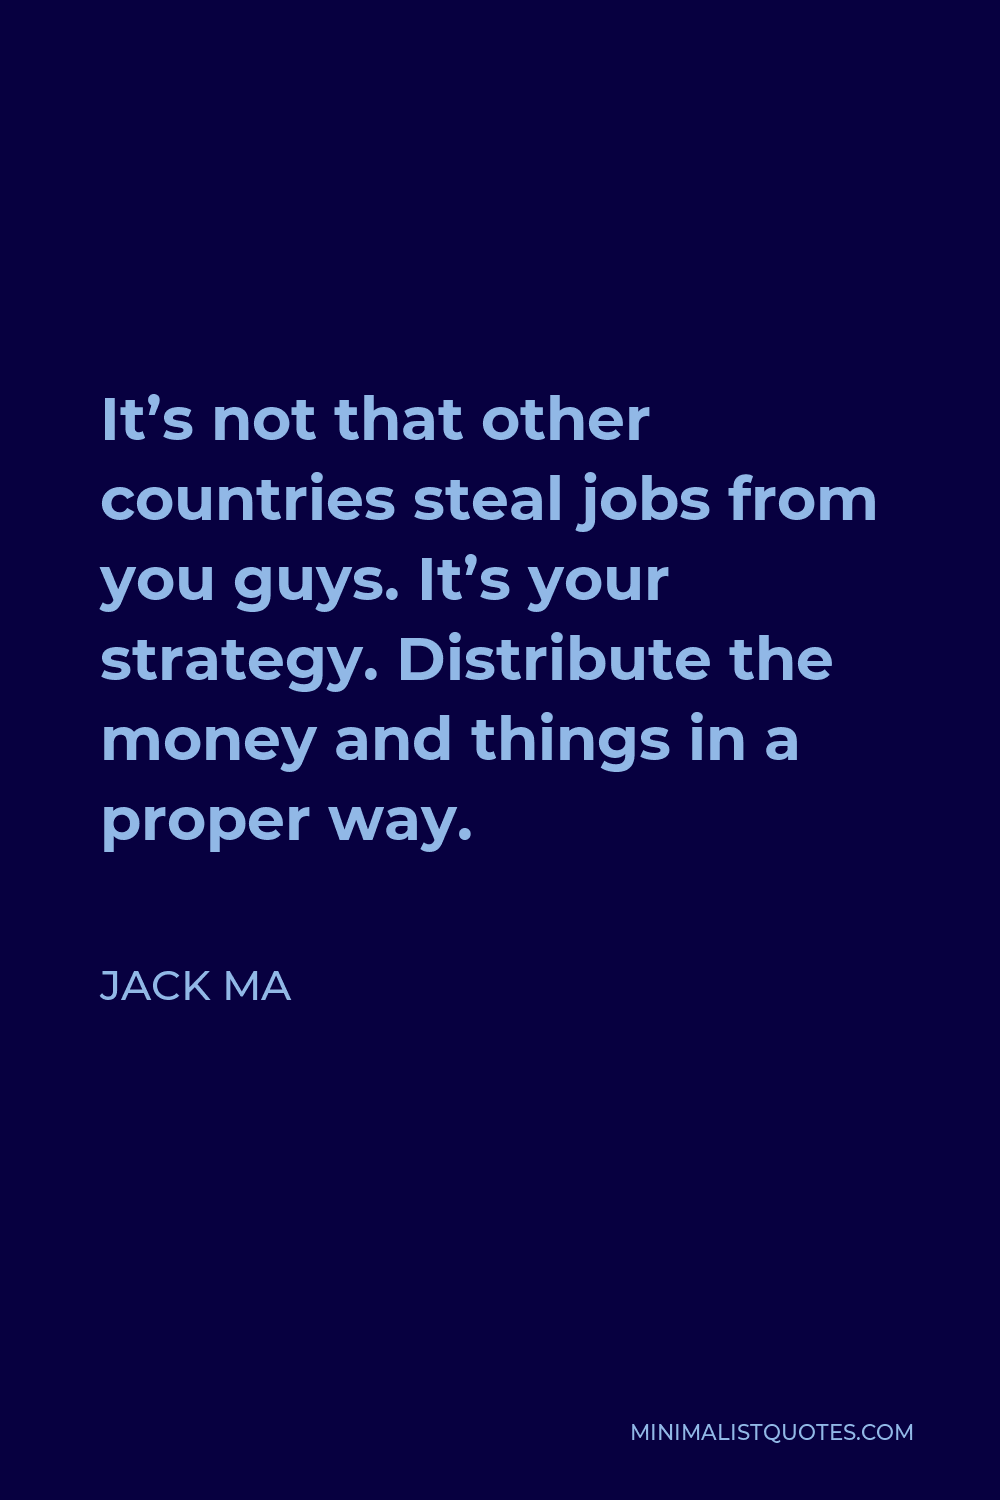 Jack Ma Quote - It’s not that other countries steal jobs from you guys. It’s your strategy. Distribute the money and things in a proper way.